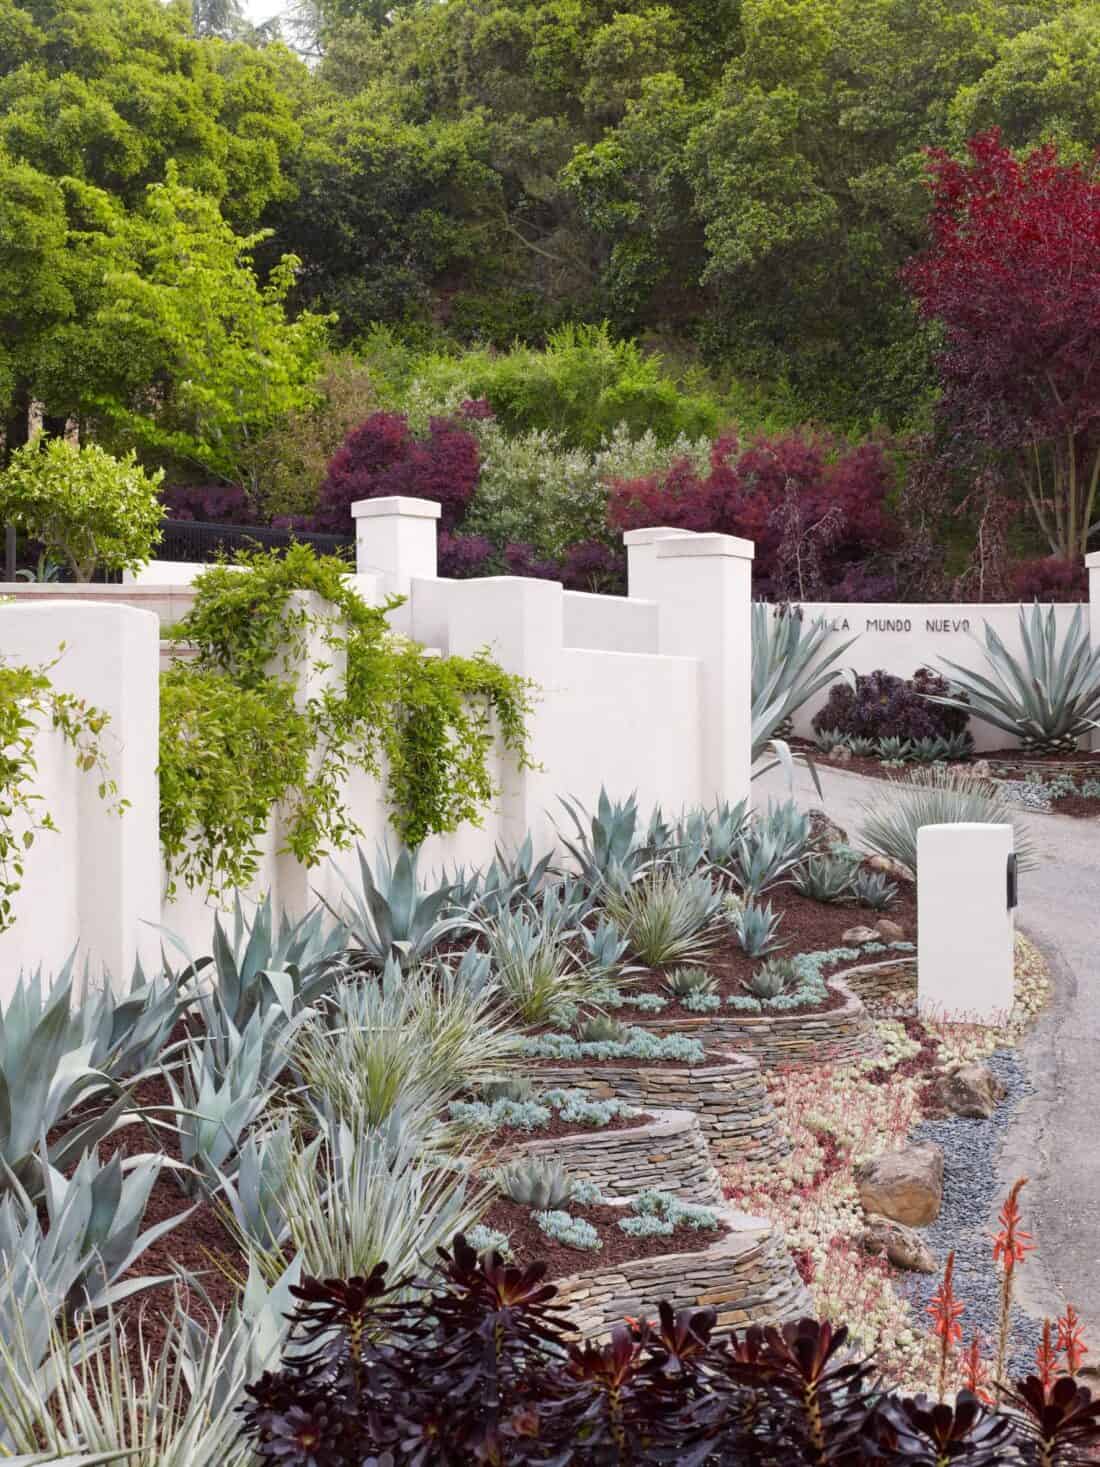 A beautifully landscaped garden gallery with a winding pathway beside a white wall adorned with climbing plants, surrounded by various succulents and agave plants. Lush green trees and shrubs create a serene backdrop, reminiscent of Los Gatos. The area is meticulously arranged with a mix of stone and soil.